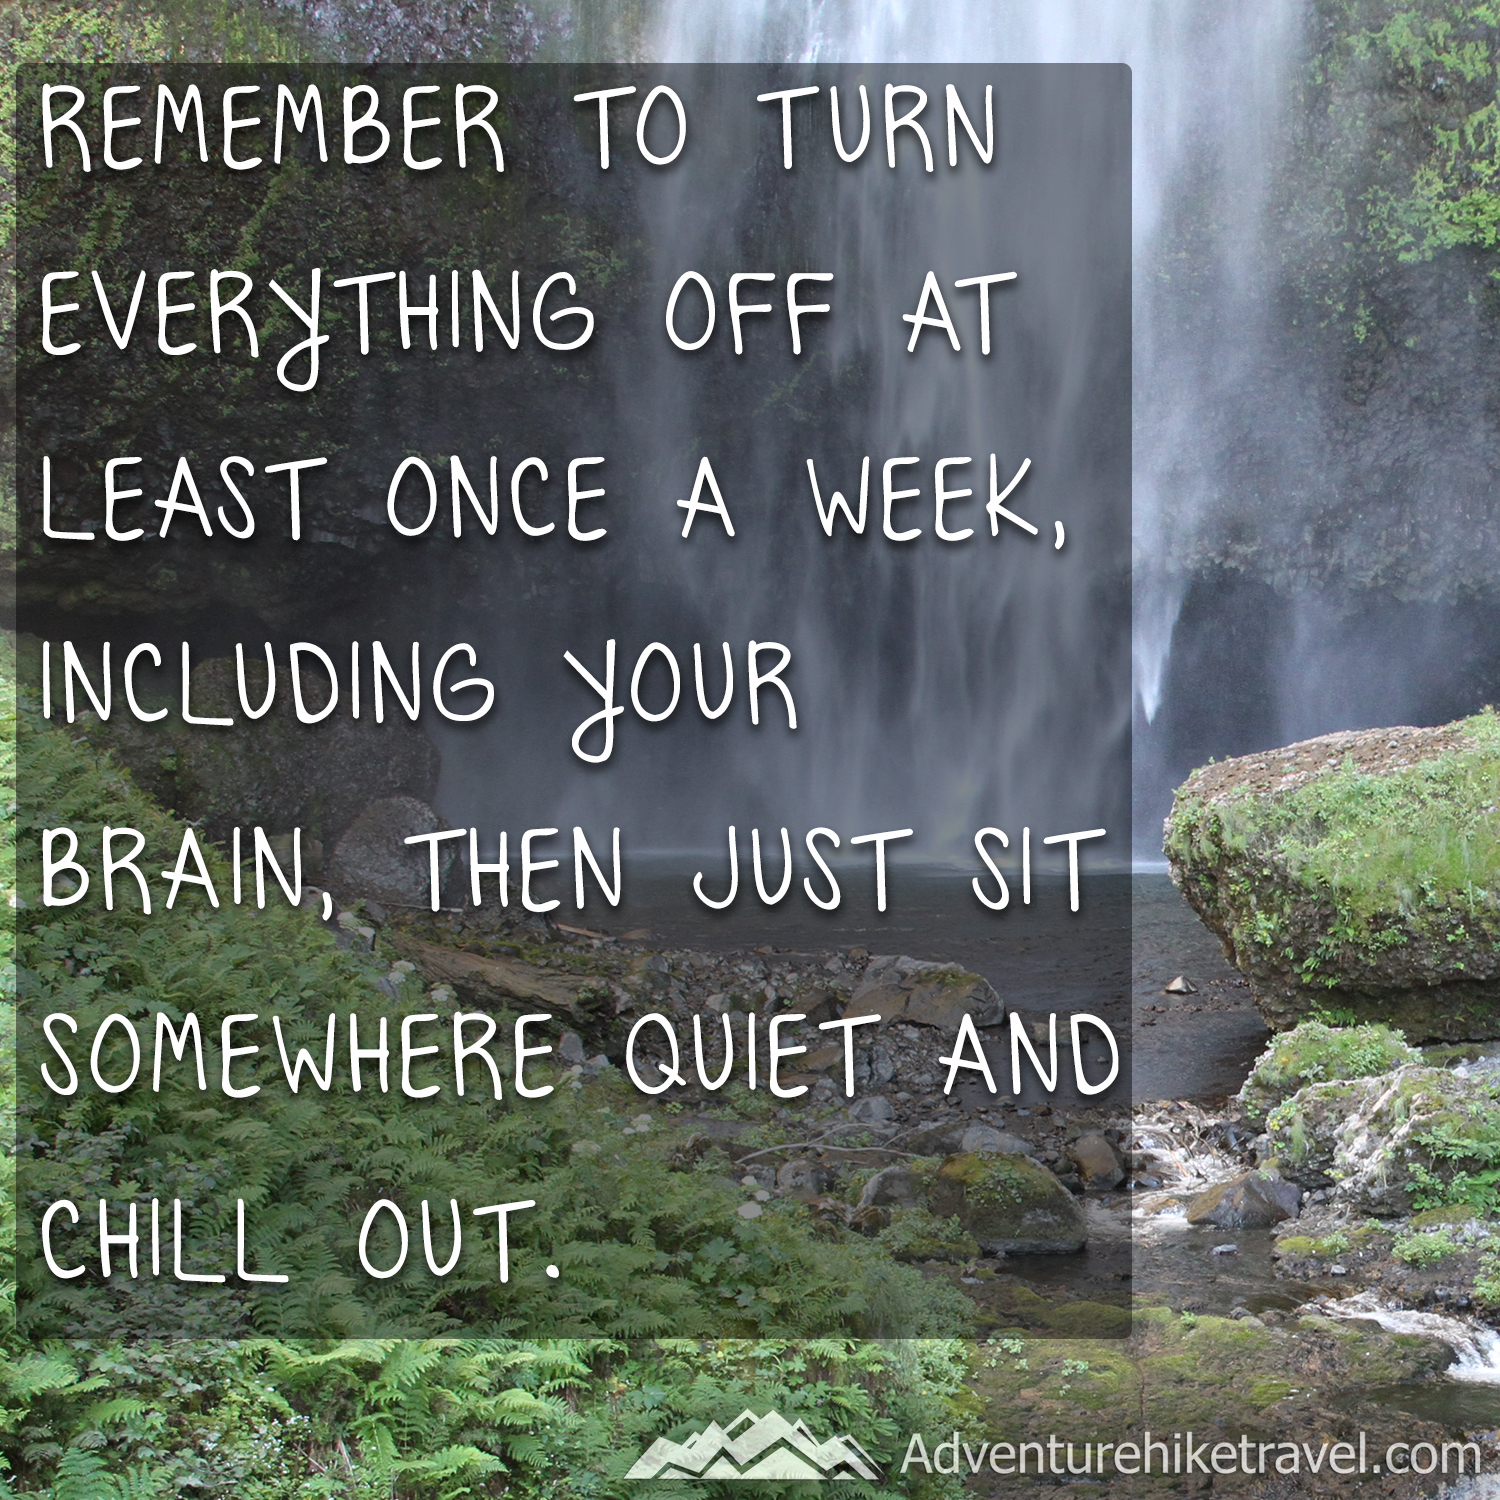 "Remember to turn everything off at least once a week, including your brain, then just sit somewhere quiet and chill out." #hiking #quotes #inspirationalquotes #hikingquotes #adventurequotes #outdoors #trekking